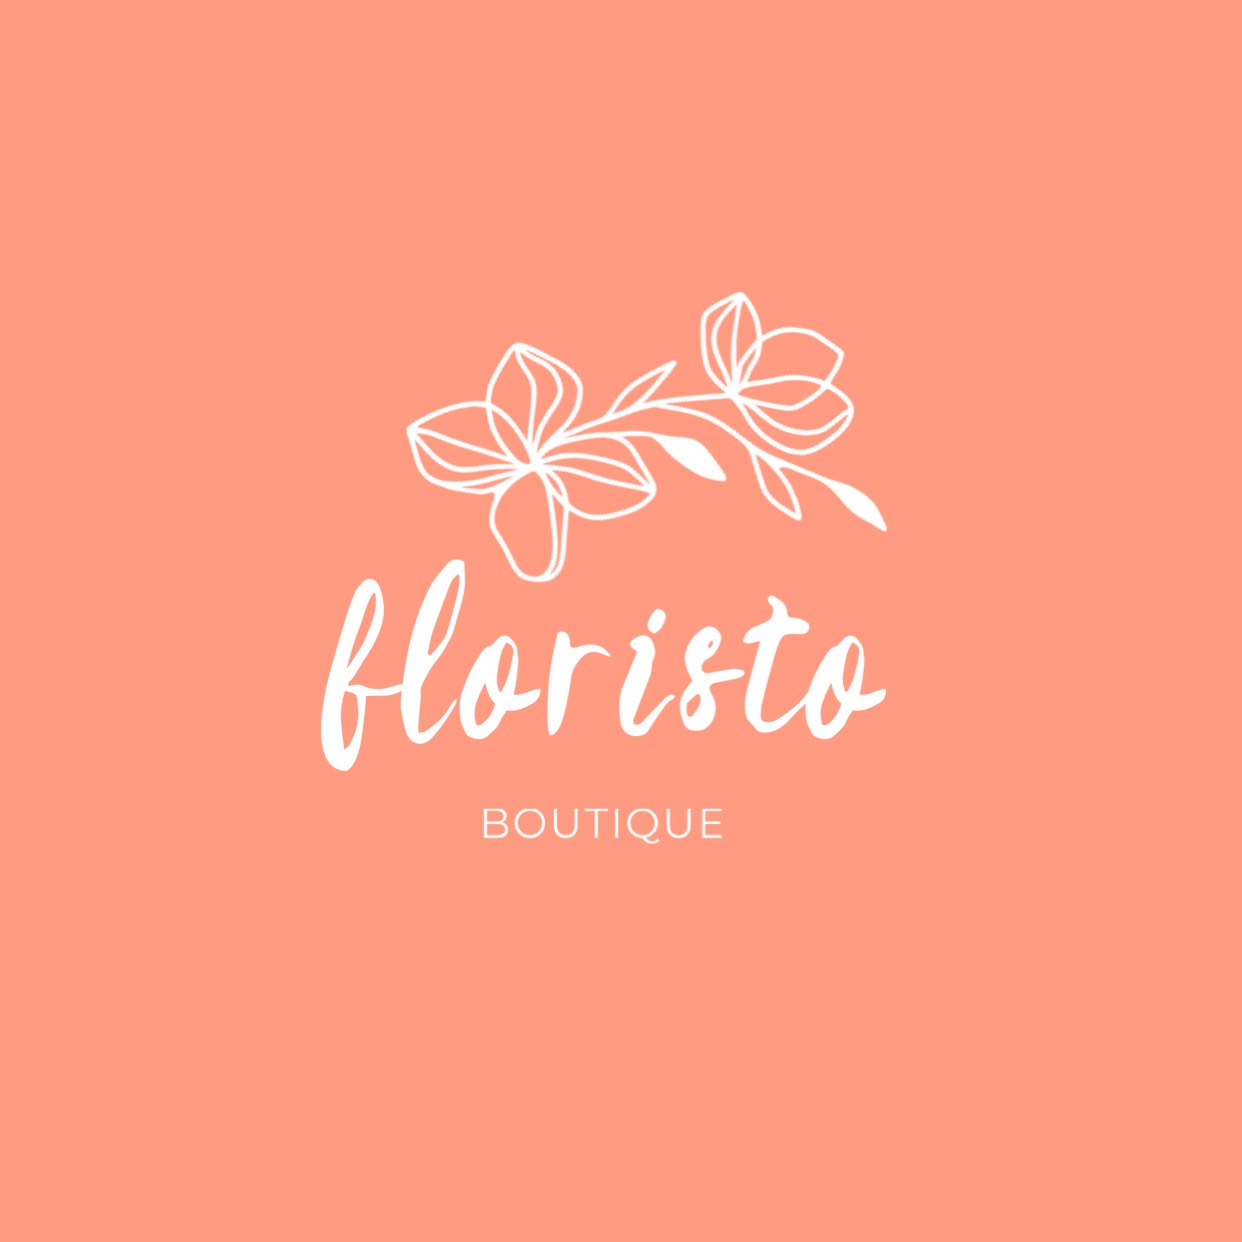 Flower And Orange Shades Boutique Logo Template